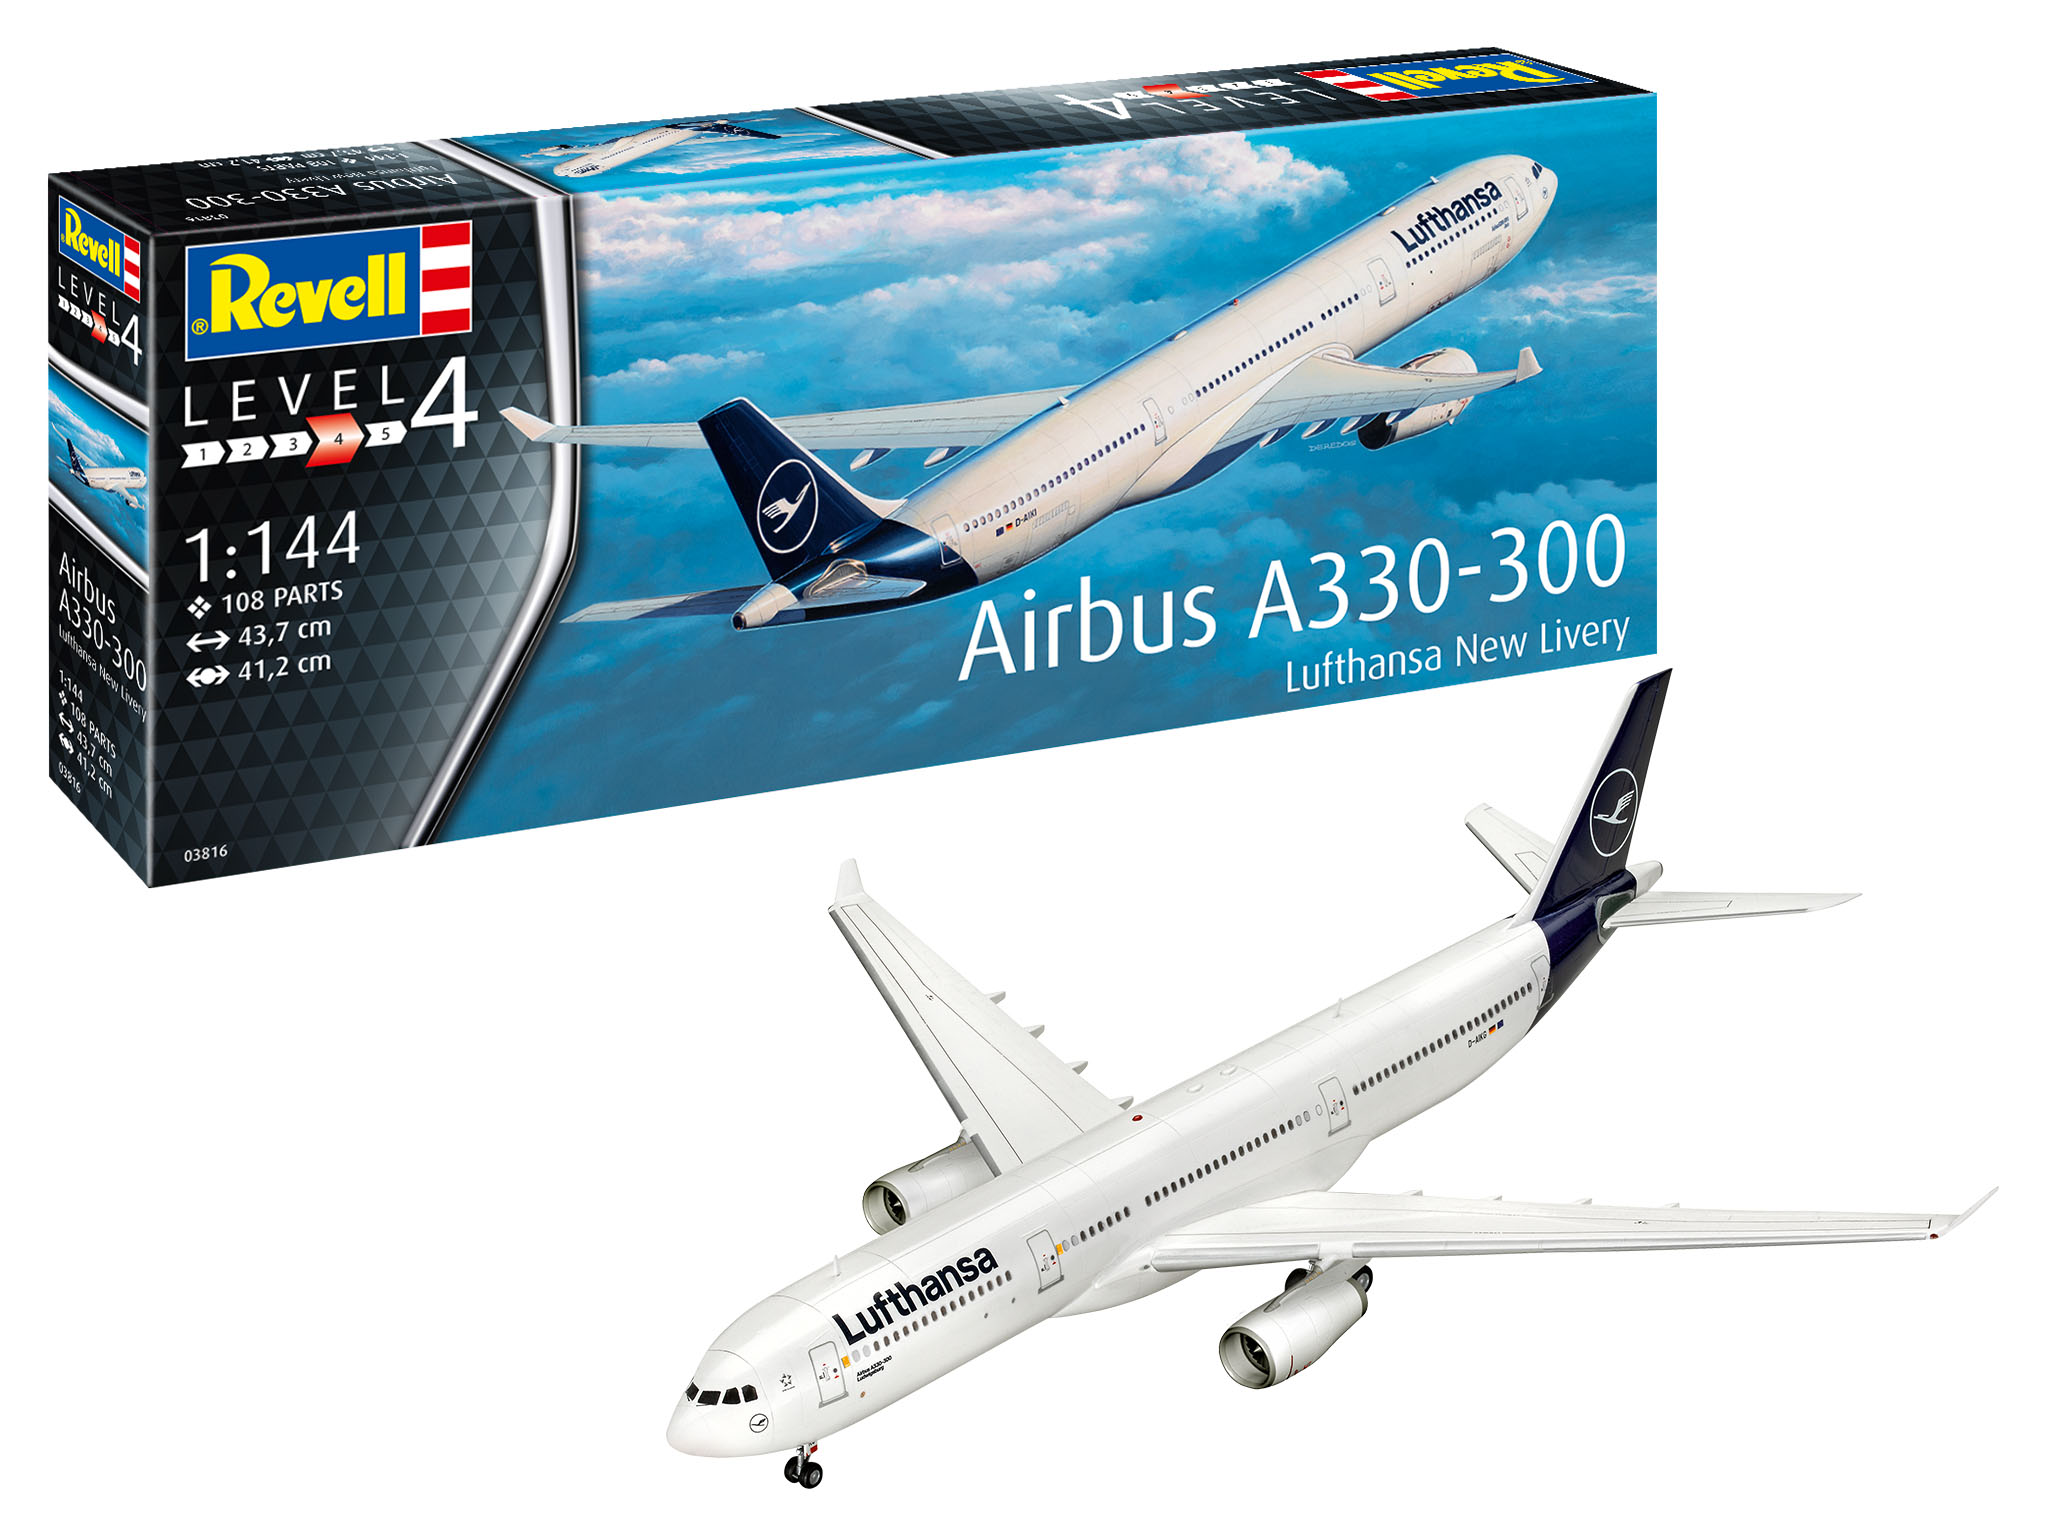 revell-03816-Airbus-A330-300-Lufthansa-New-Livery